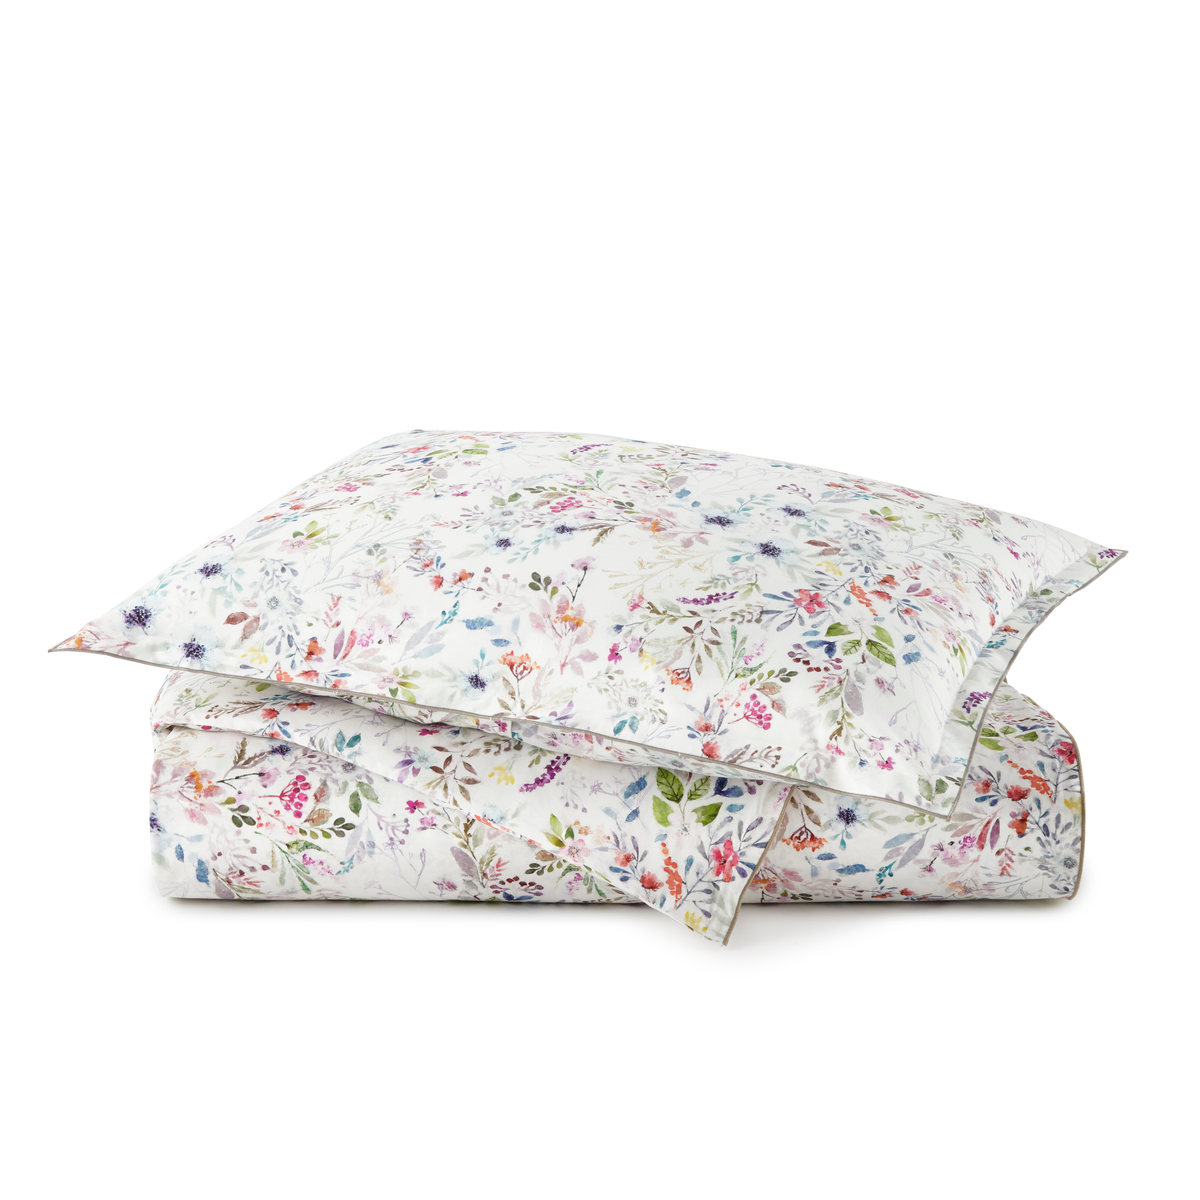 Stacked Sham and Coverlet of Peacock Alley Chloe Collection in Color Floral